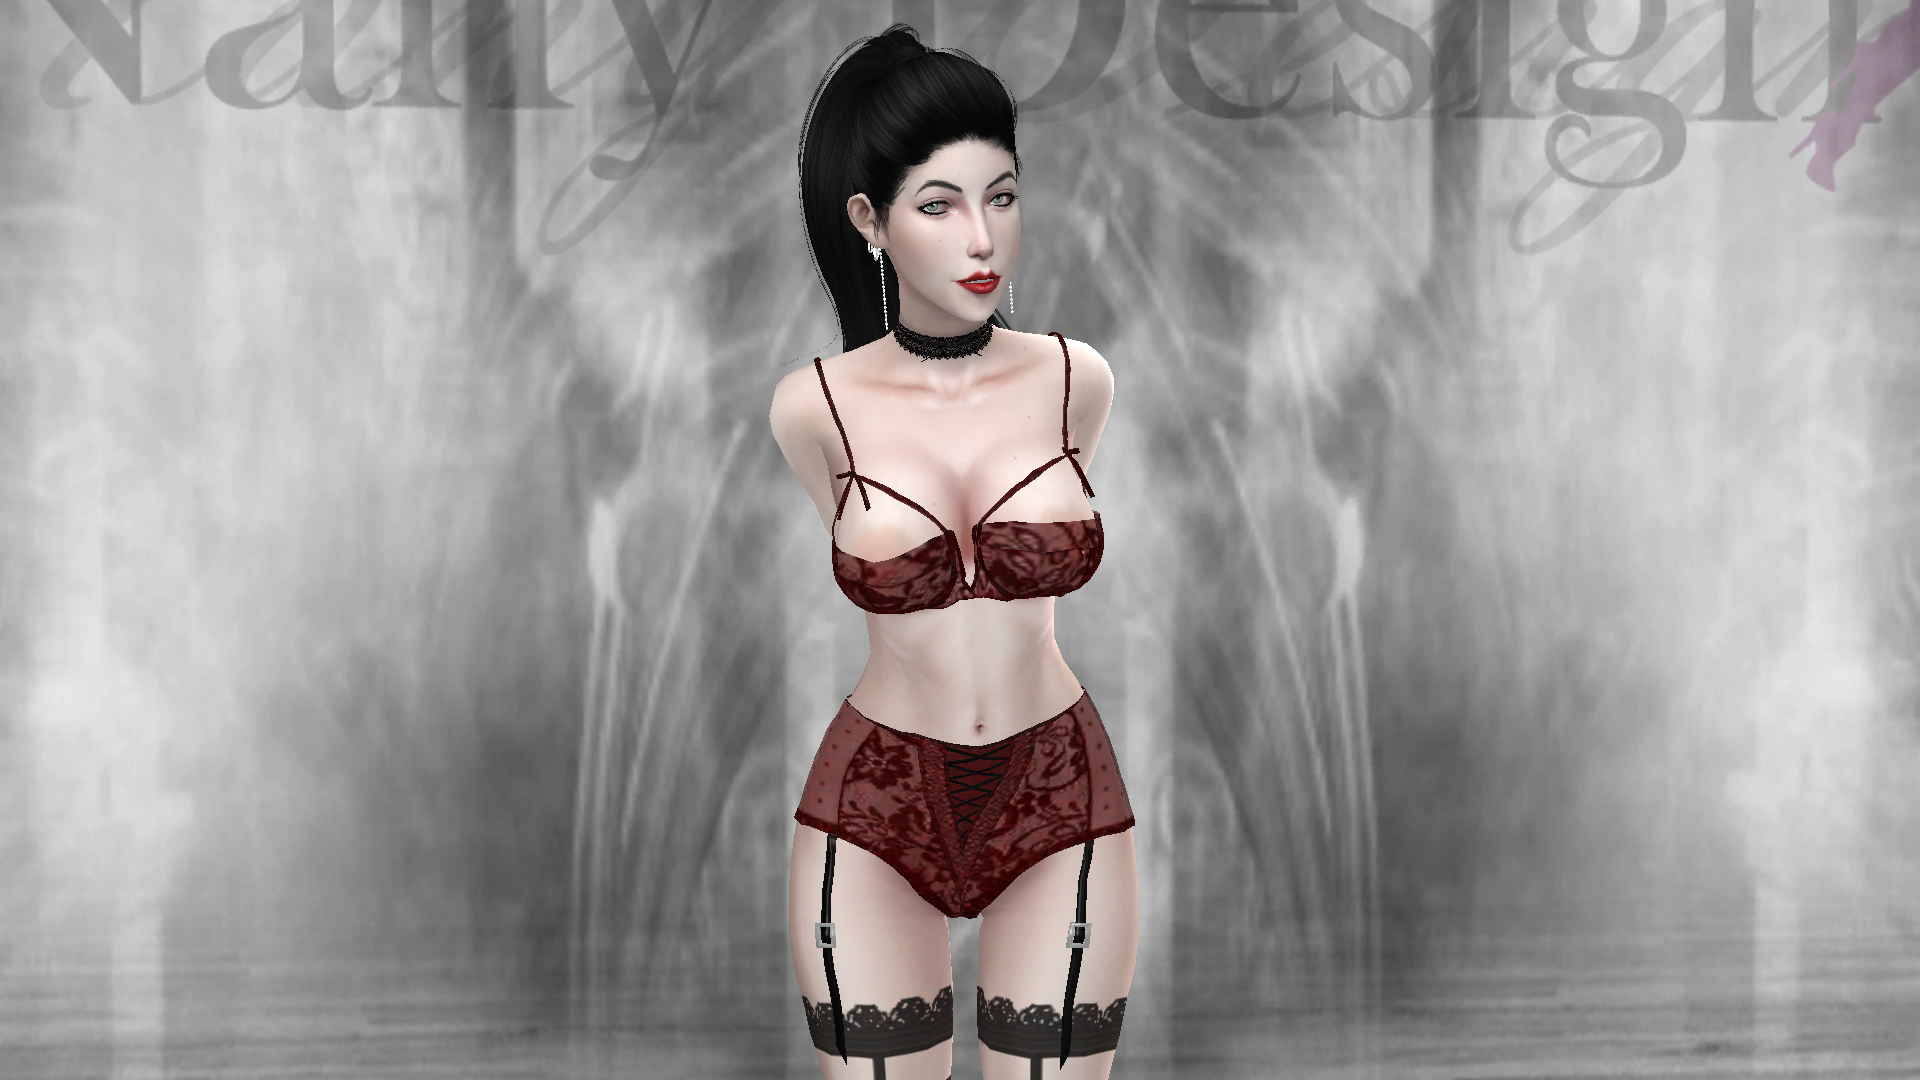 Sexy Lingerie Request And Find The Sims 4 Loverslab 